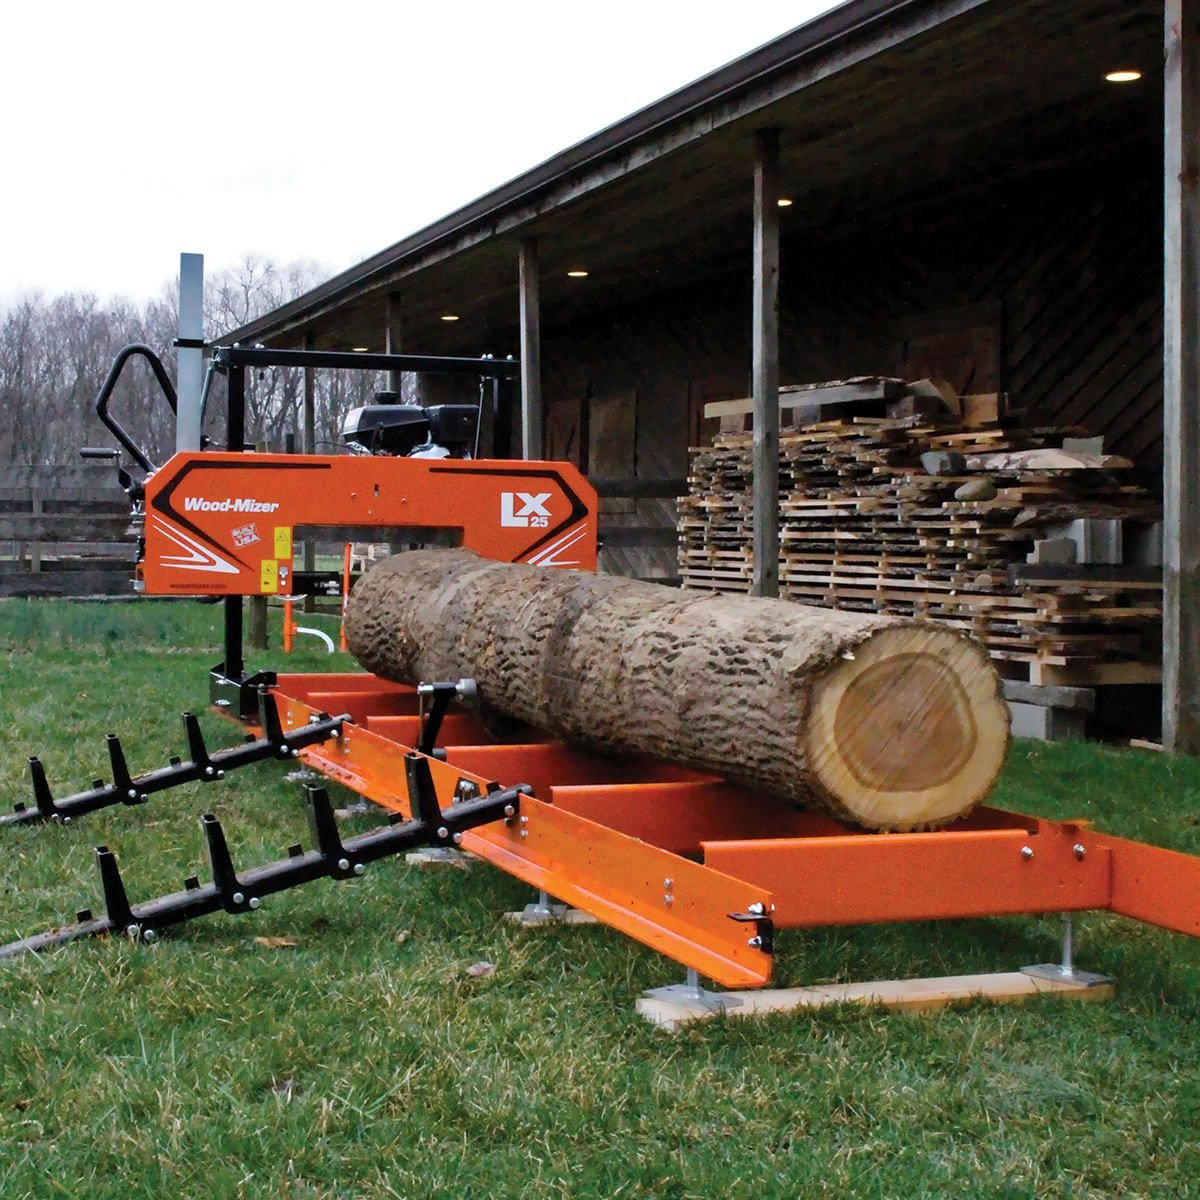 Chainsaw Mill Mini Lumber Cutting Guide Vertical Timber Chainsaw